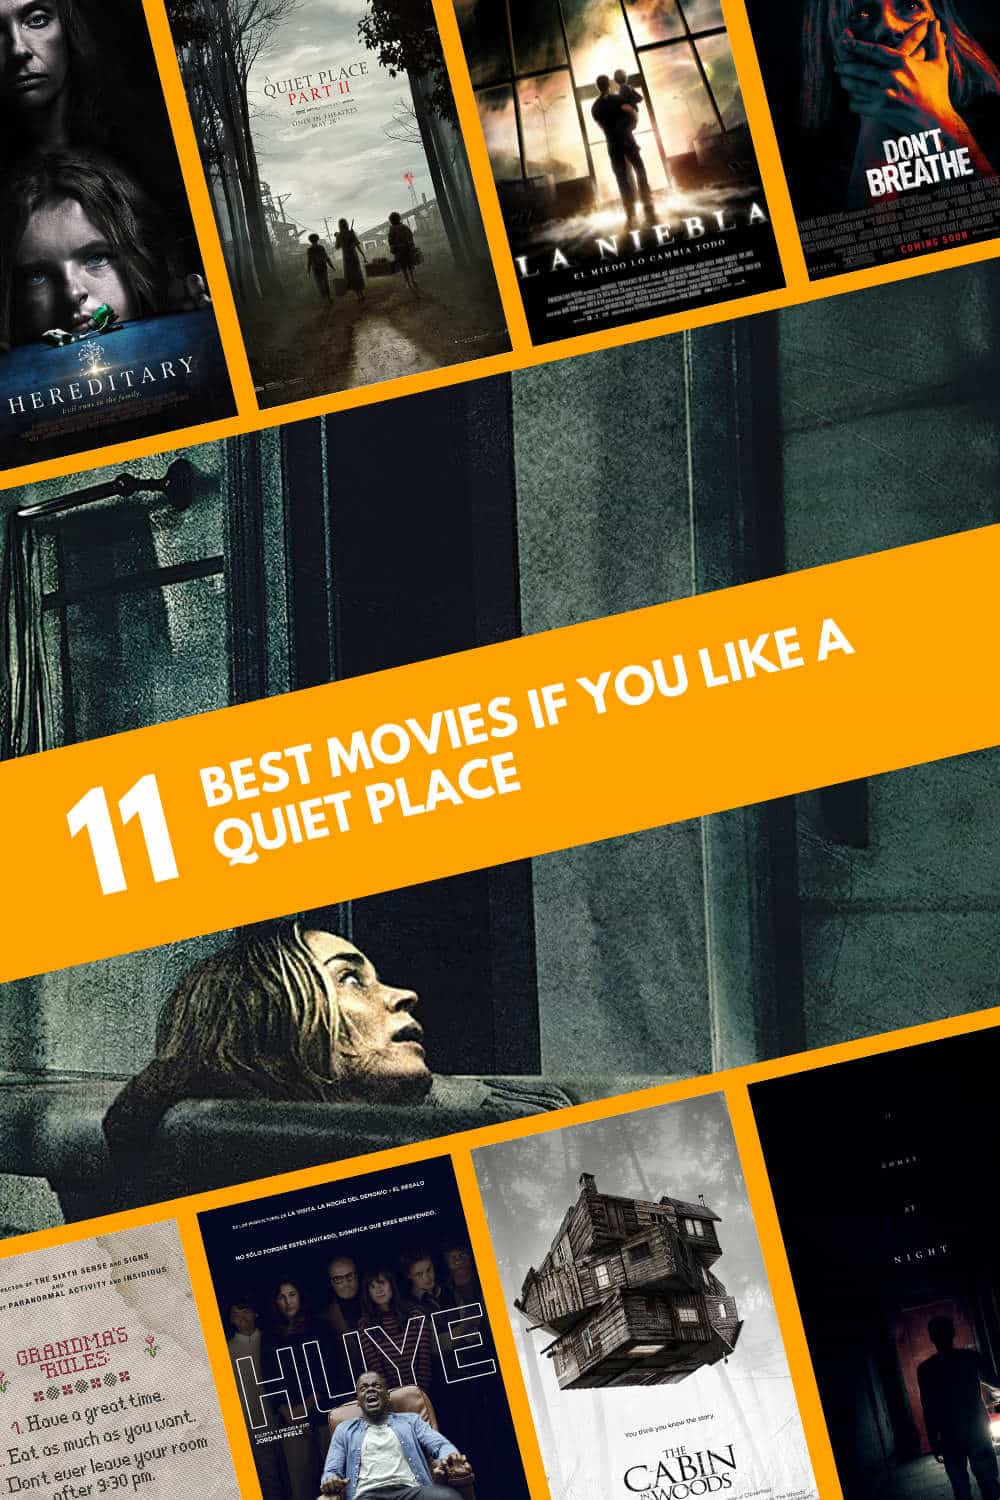 Movie if You Like A Quiet Place